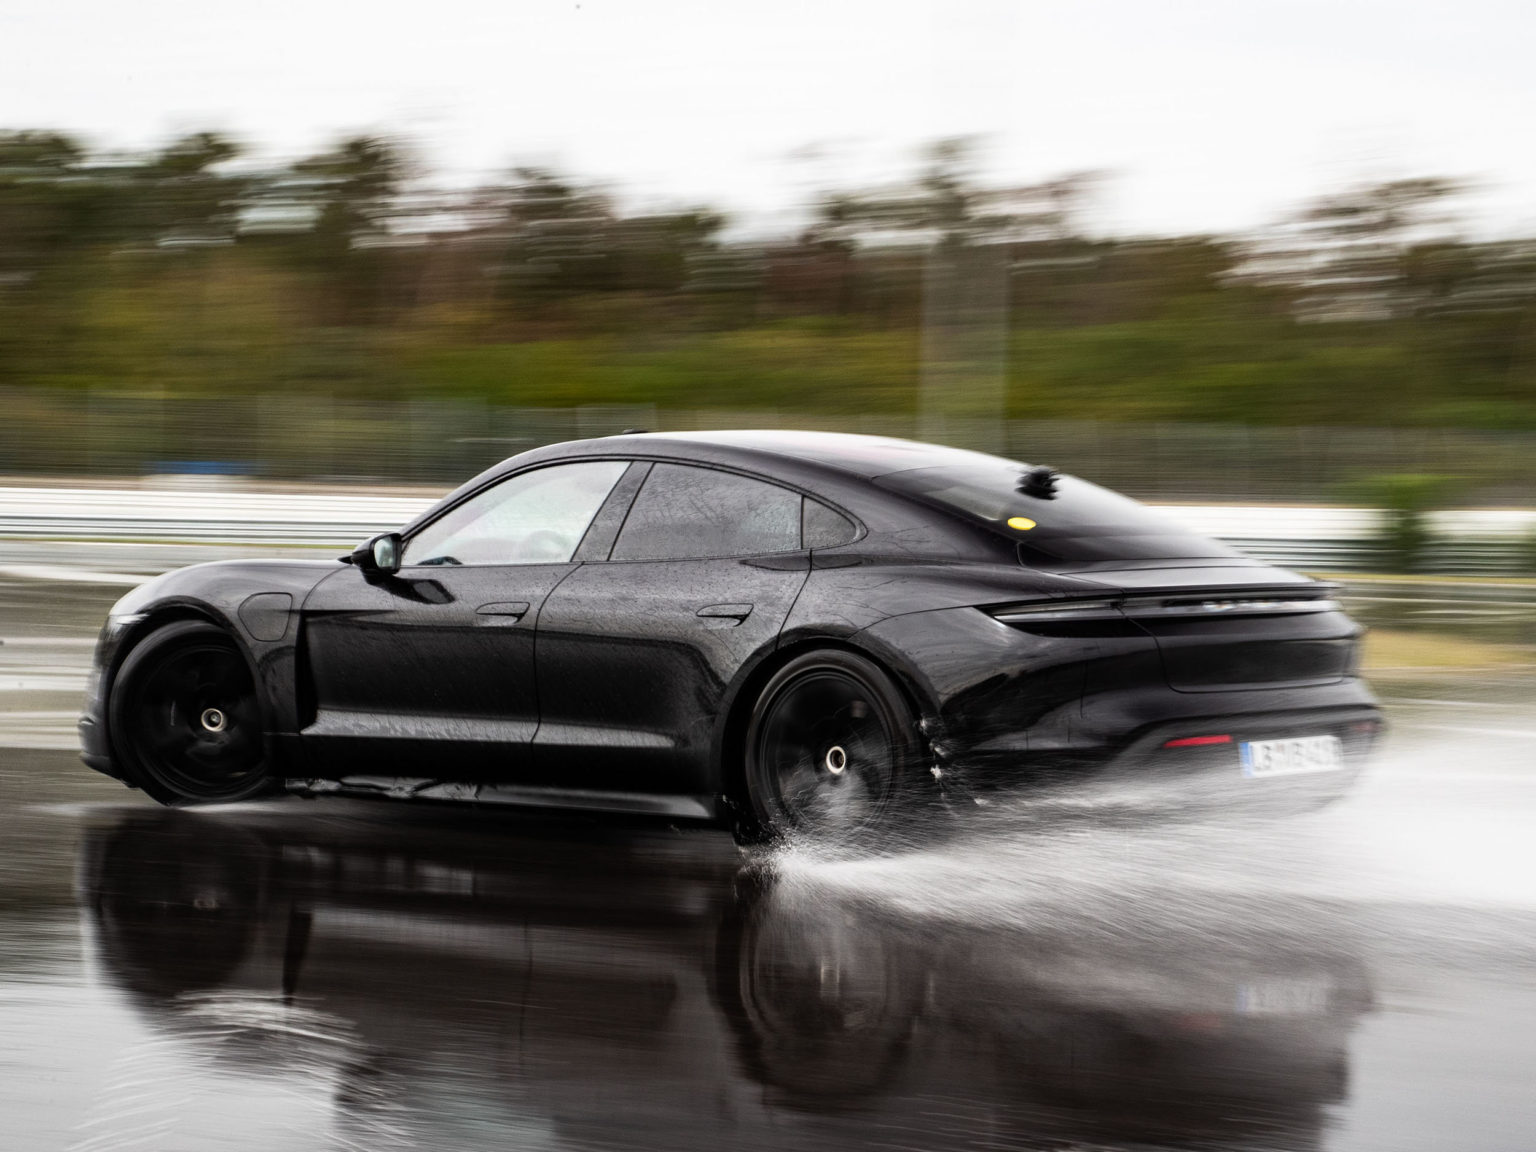 The all-electric Porsche Taycan took to a track in Germany to set a new world record.